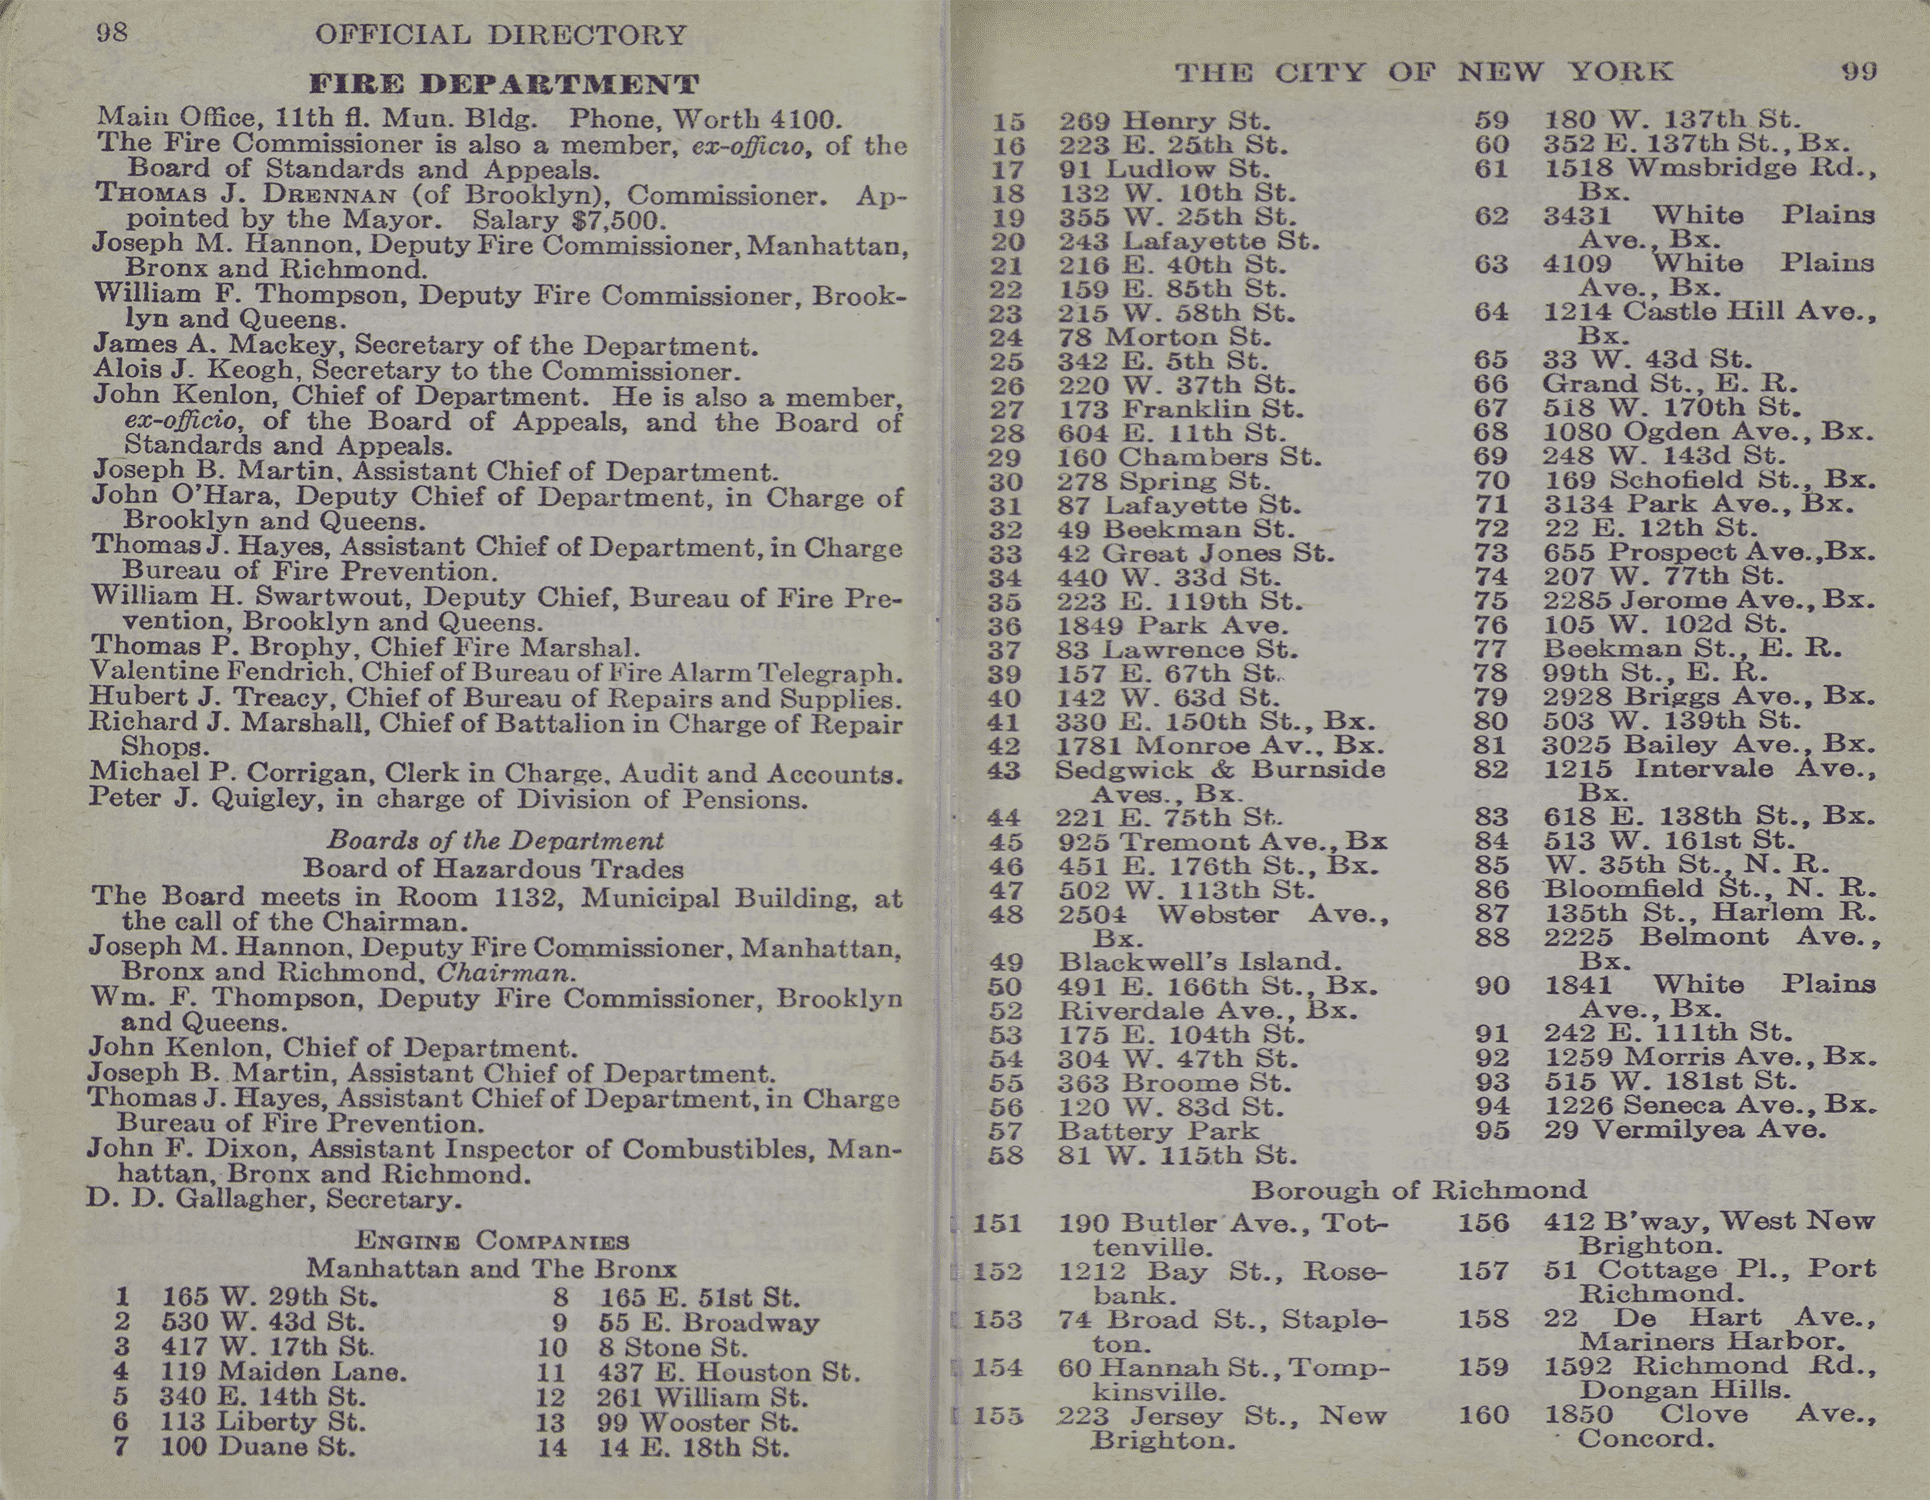 A page from the Official Directory listing the main office and the management of the Fire Department.